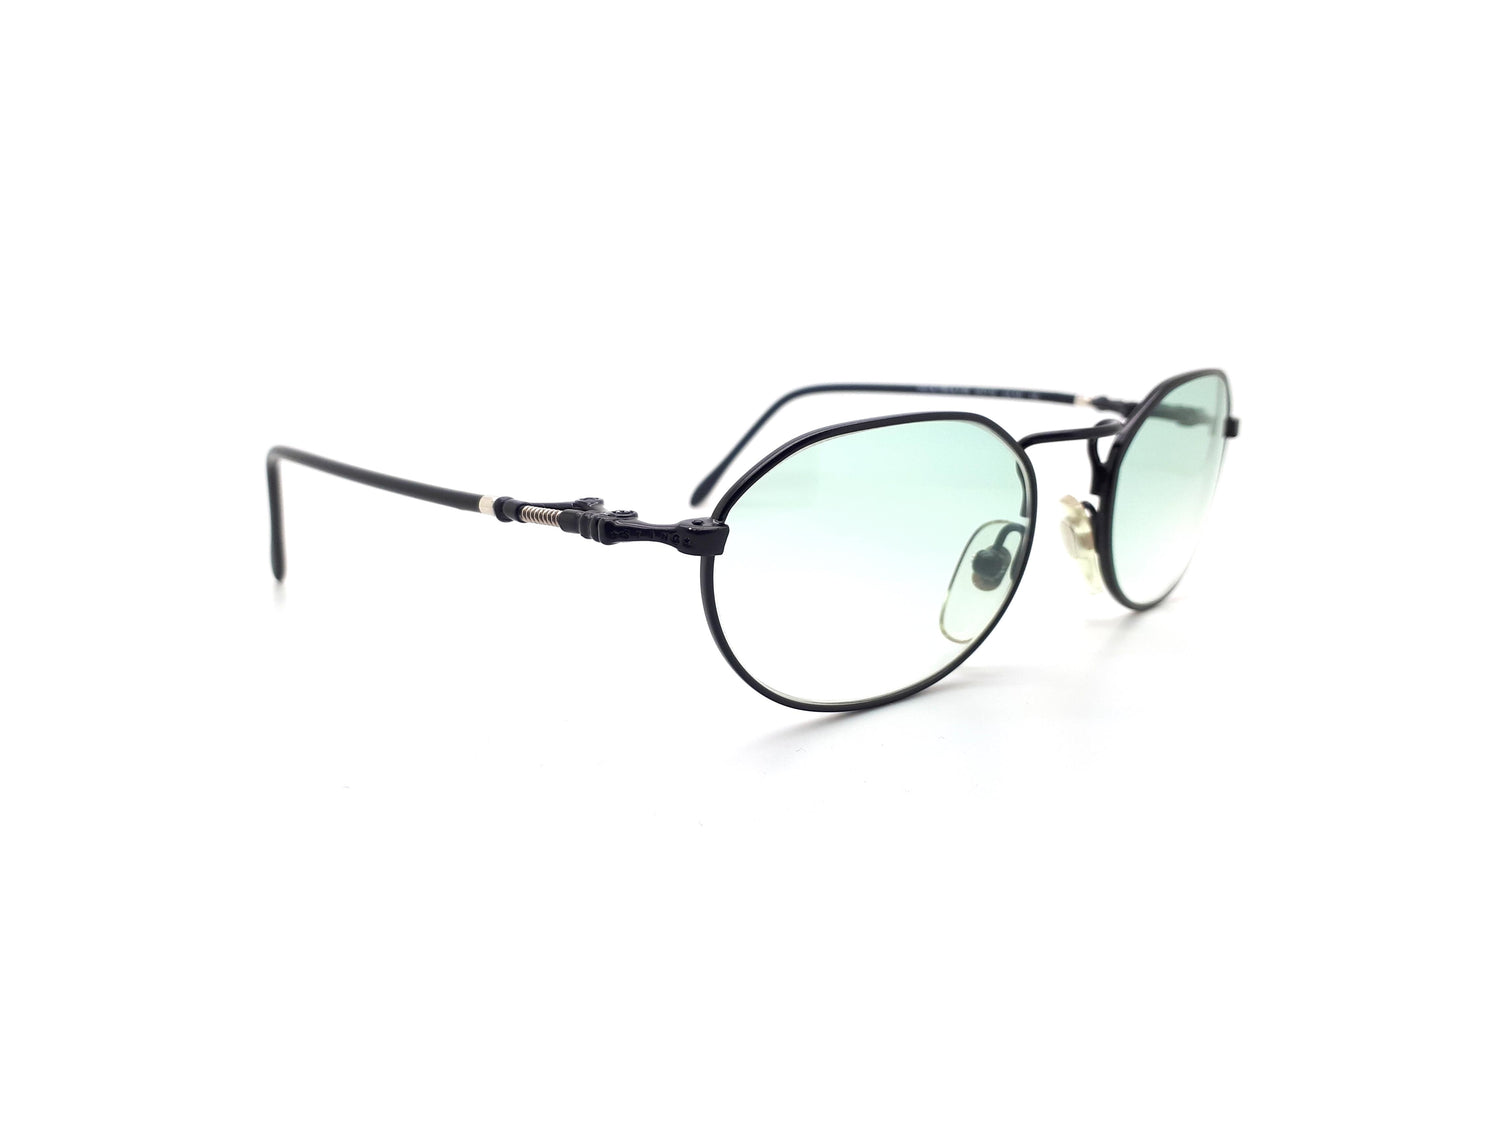 Sting vintage sunglasses with spring hinges